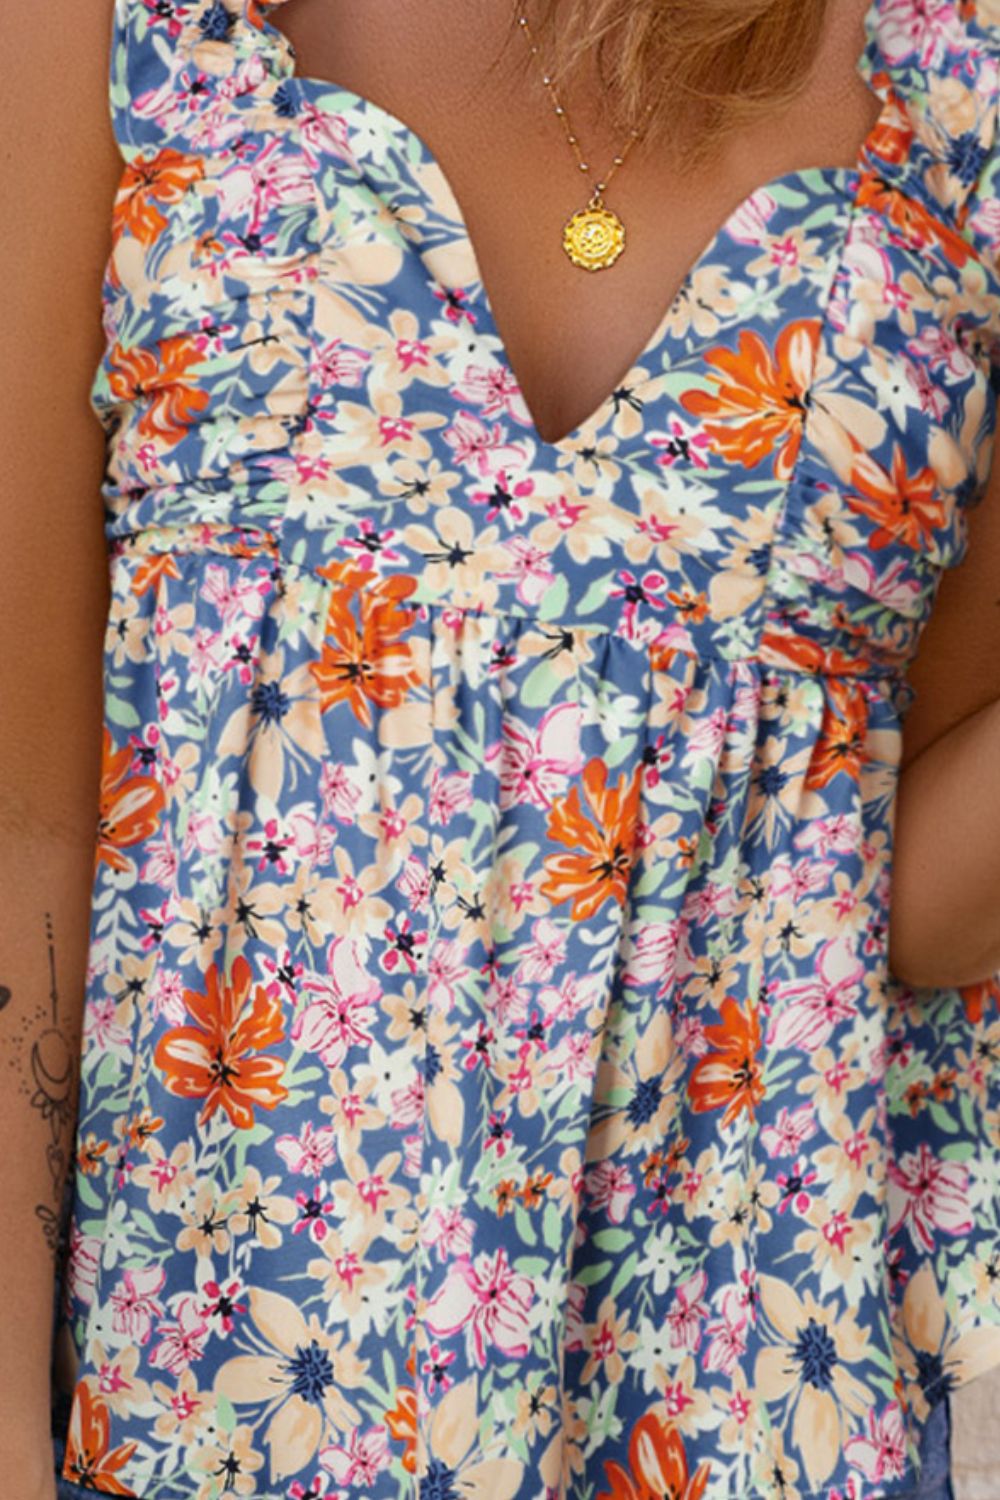 Load image into Gallery viewer, Floral Smocked Cap Sleeve Top- ONLINE ONLY 2-10 DAY SHIPPING